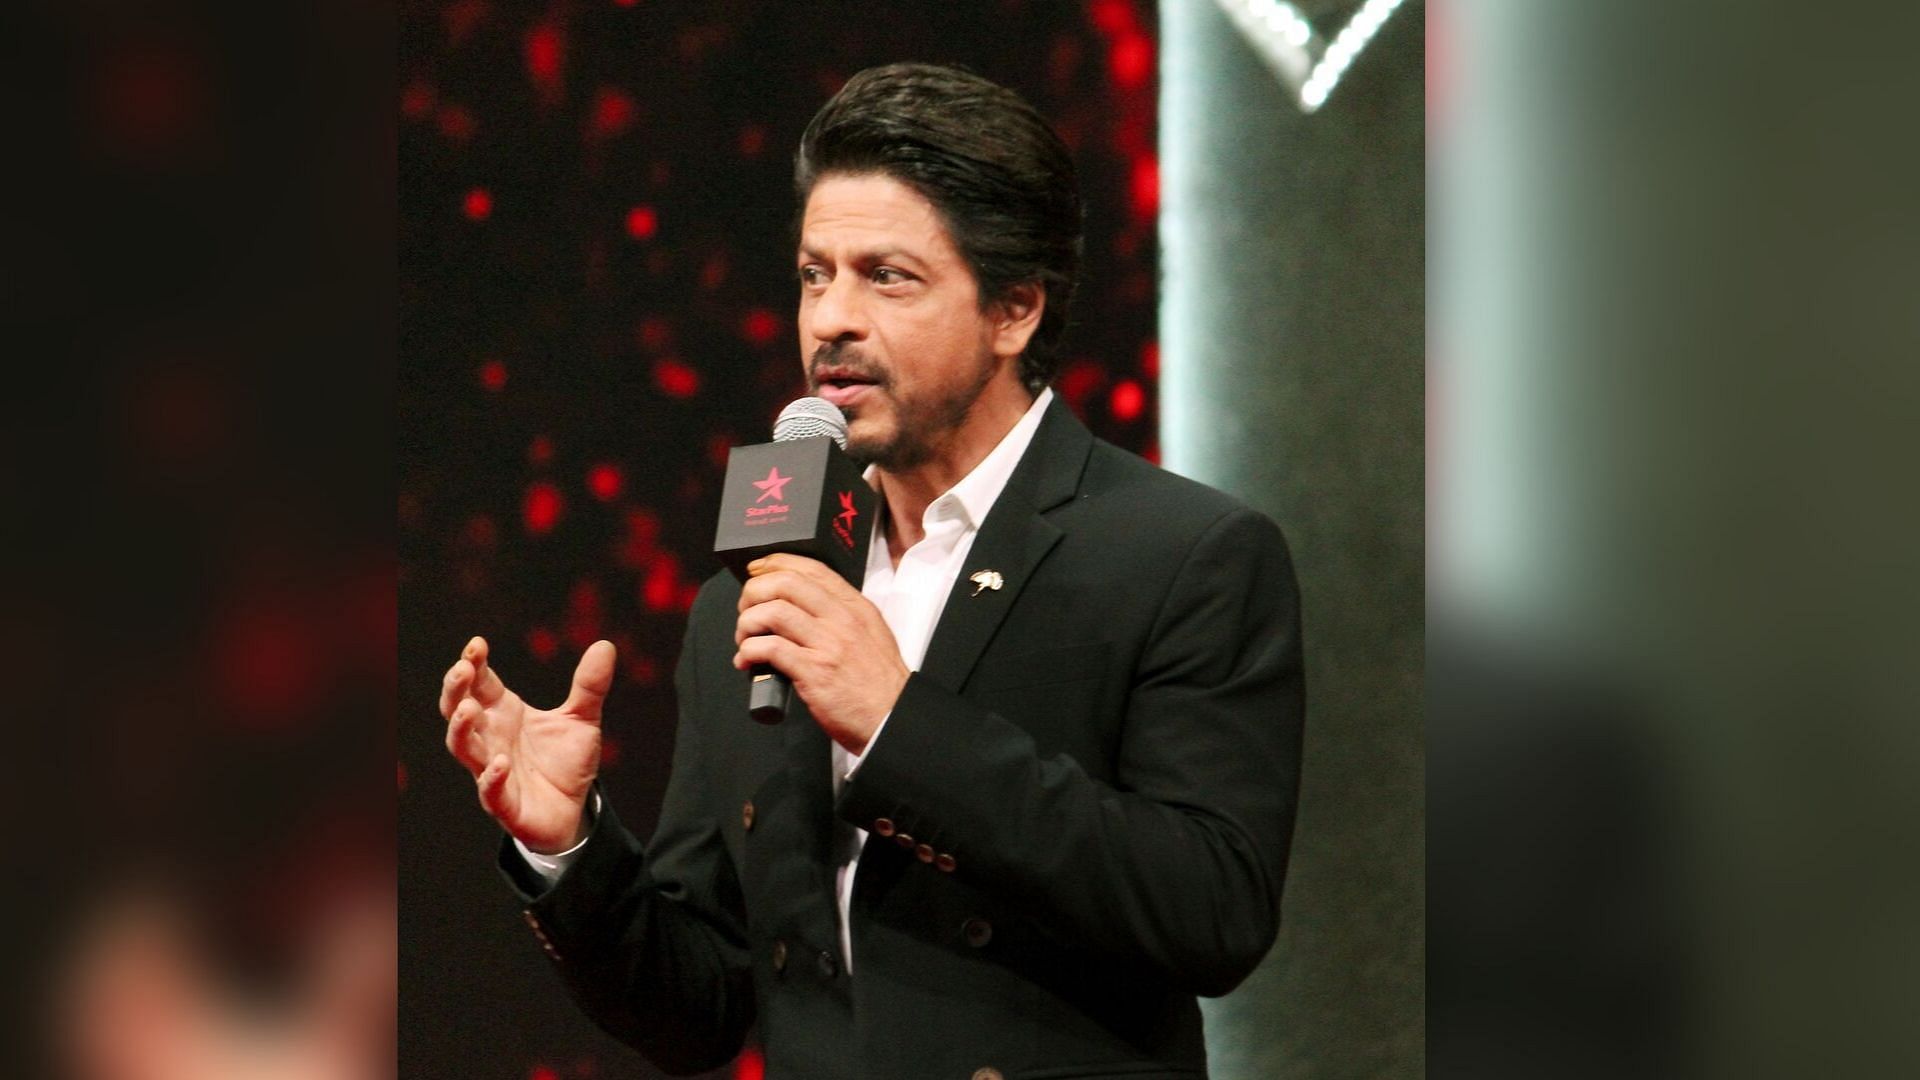 Shah Rukh Khan never fails to be witty and charming